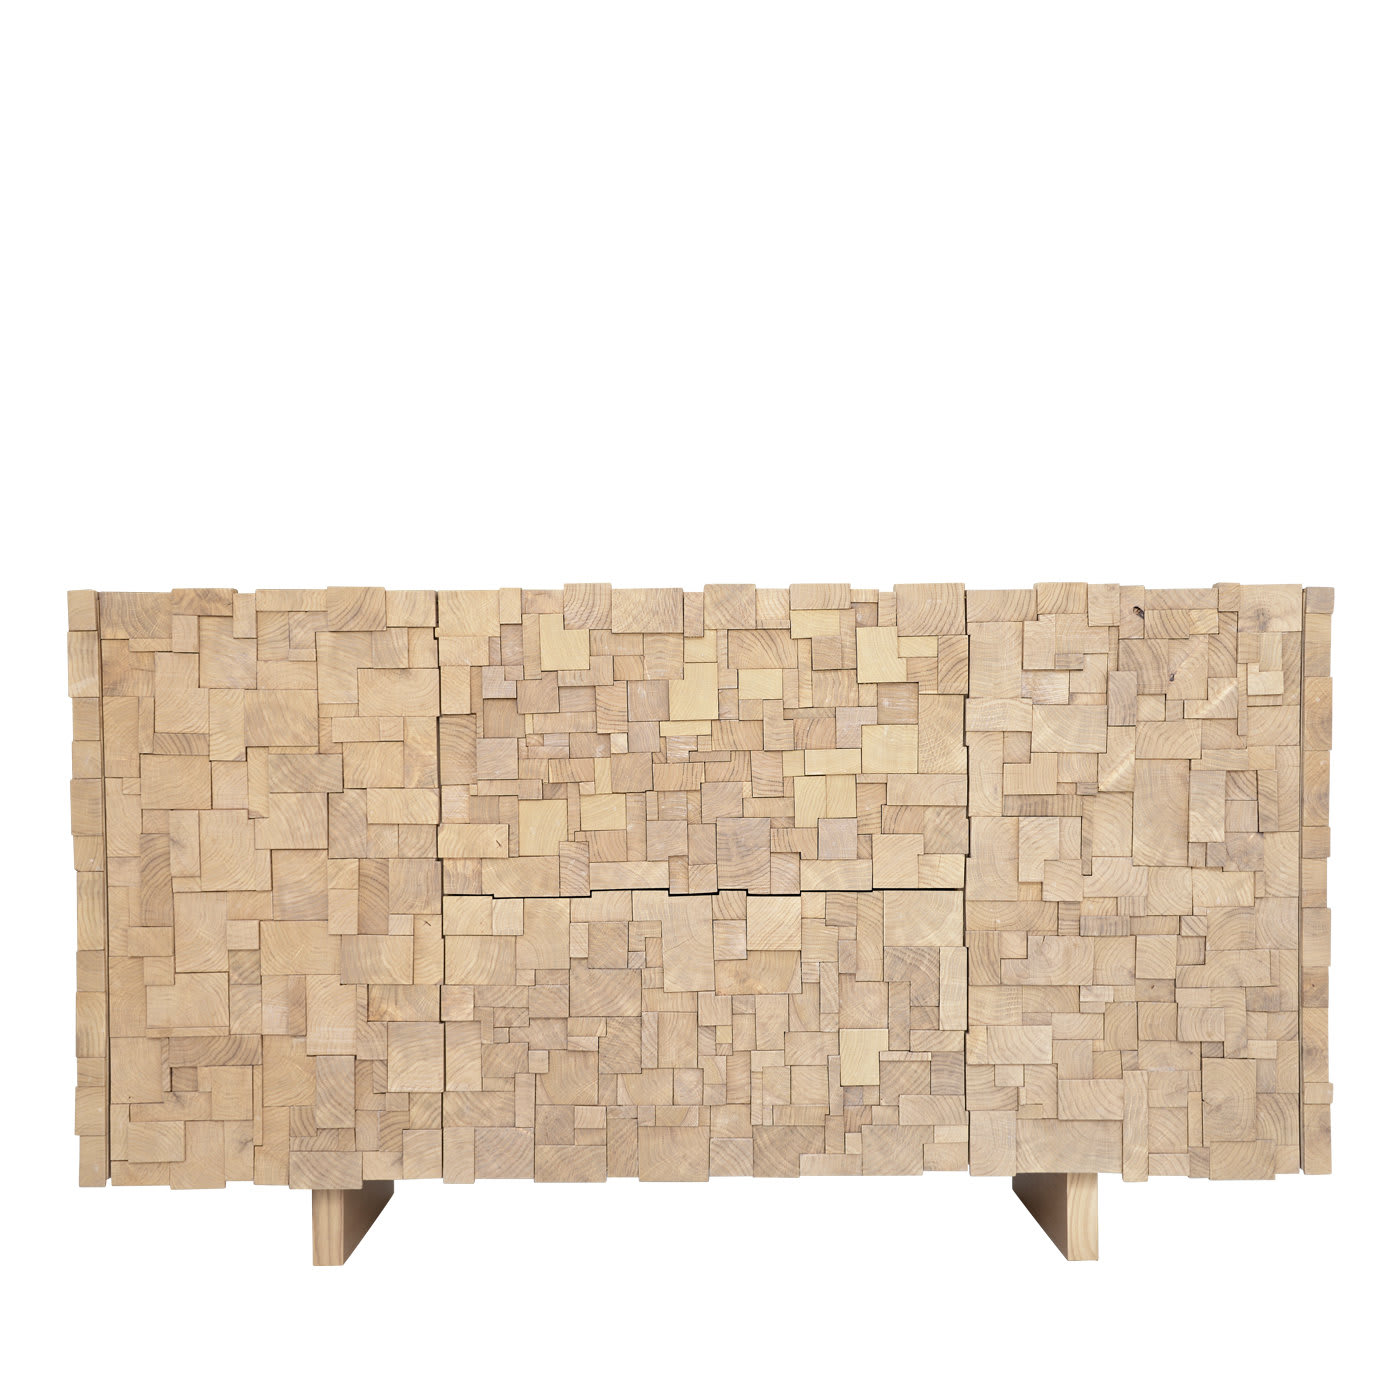 Caos Sideboard - Frigerio Paolo & C.